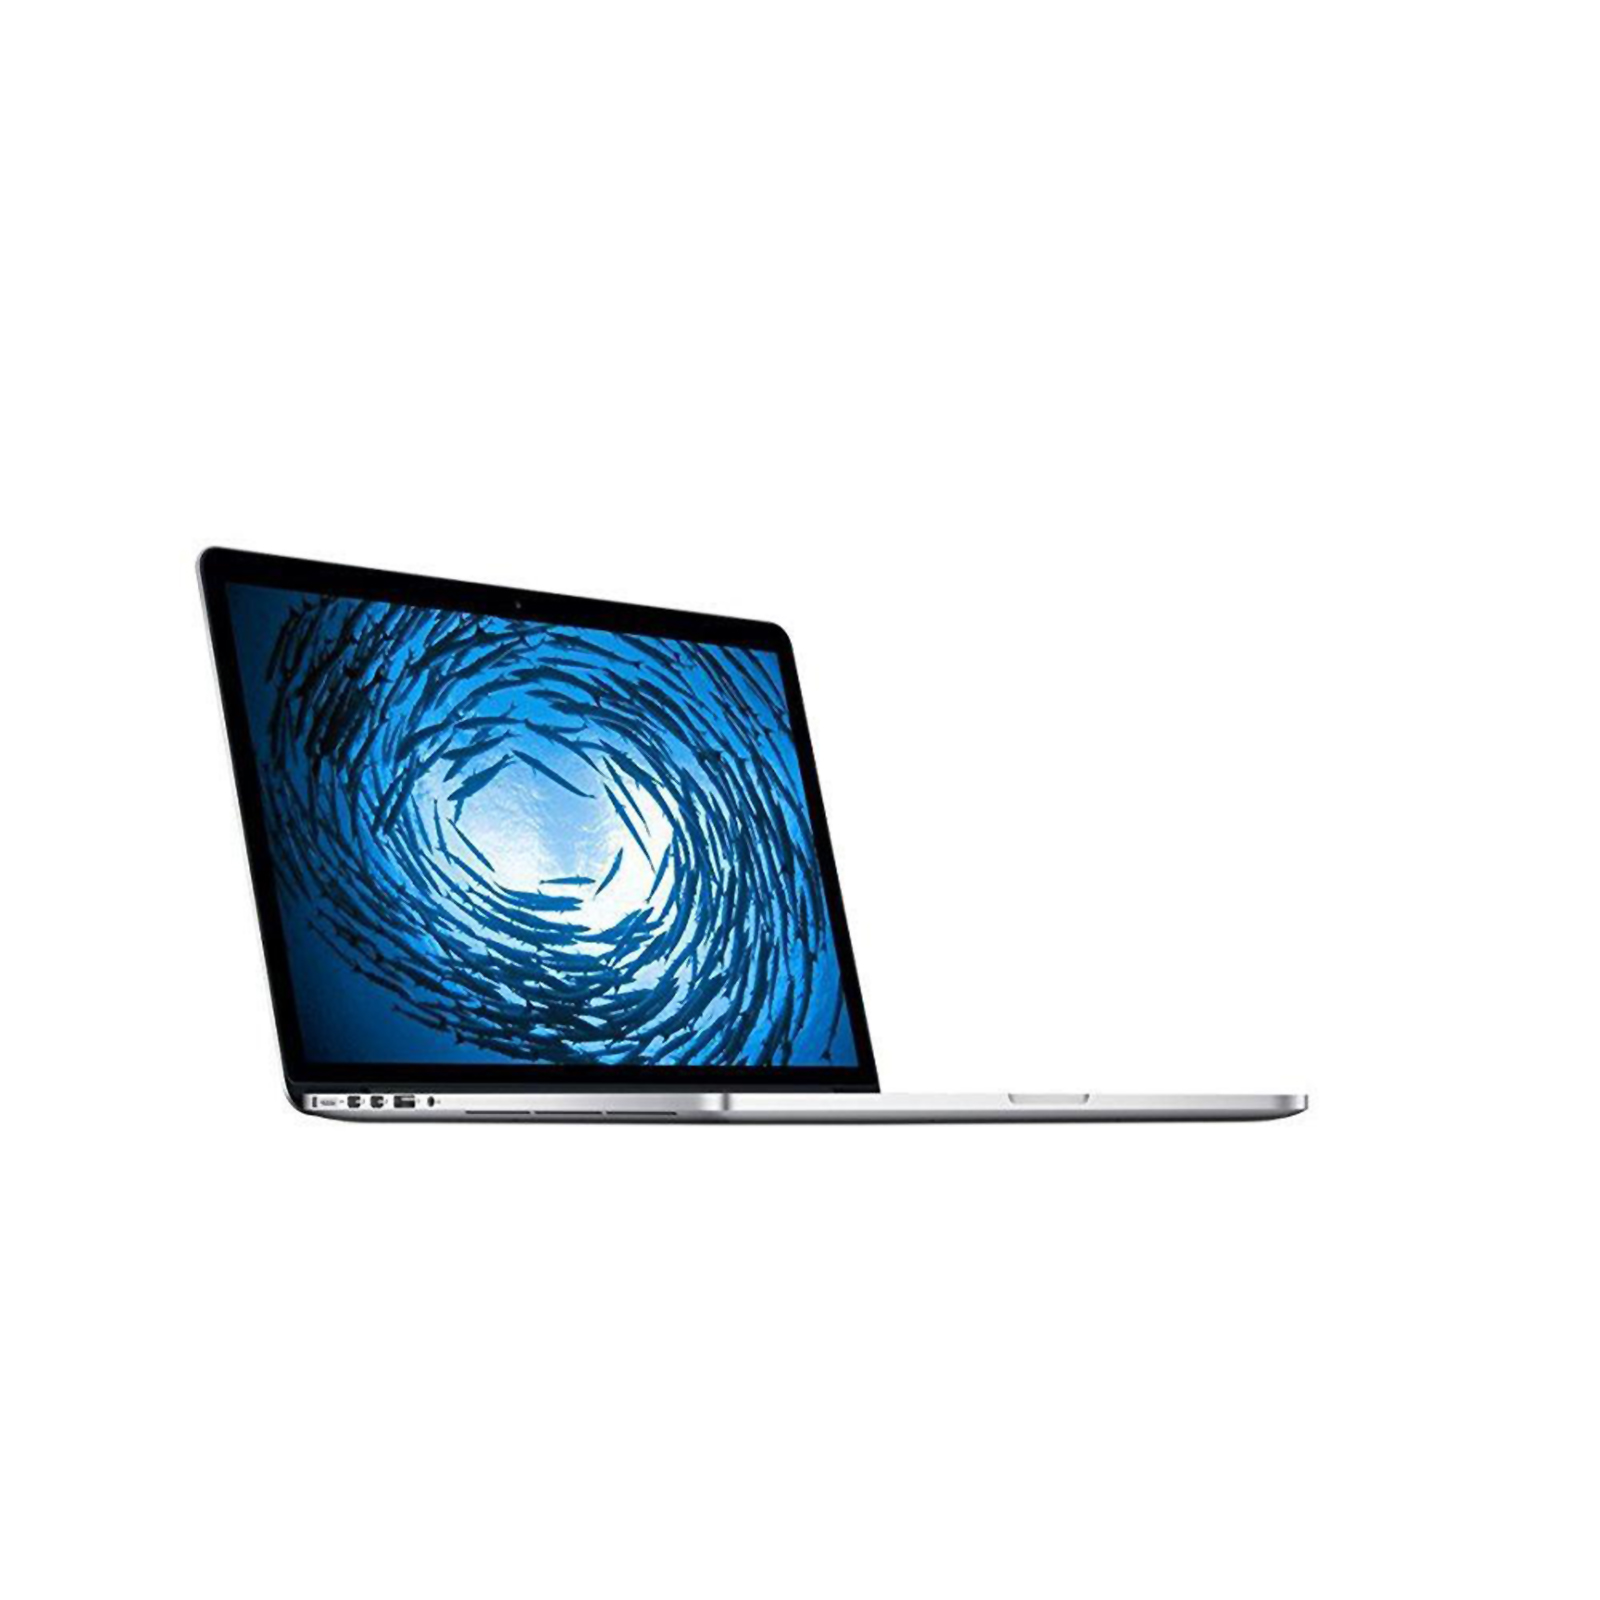 Apple ME294LL/A 15.4" MacBook Pro with Intel Core i7 Crystalwell 2.3GHz Processor